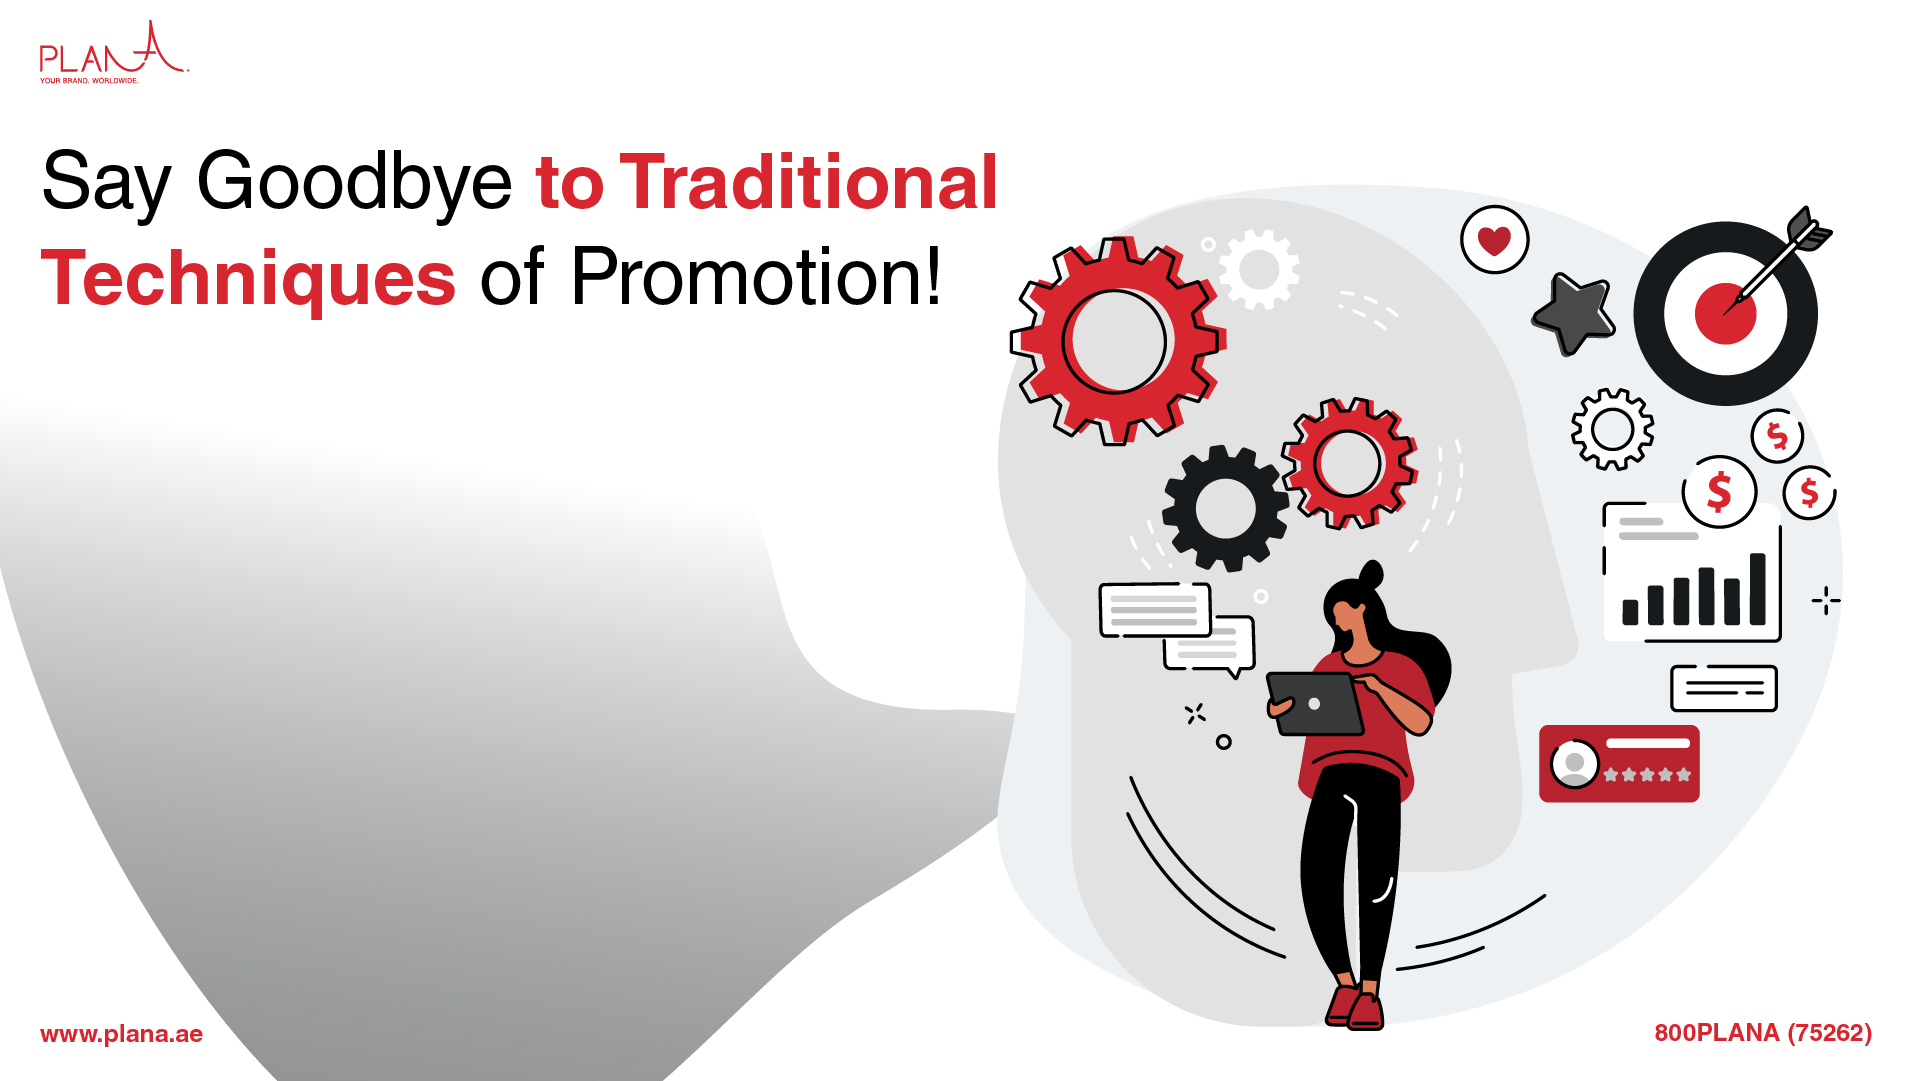 Say Goodbye to Traditional Techniques of Promotion!